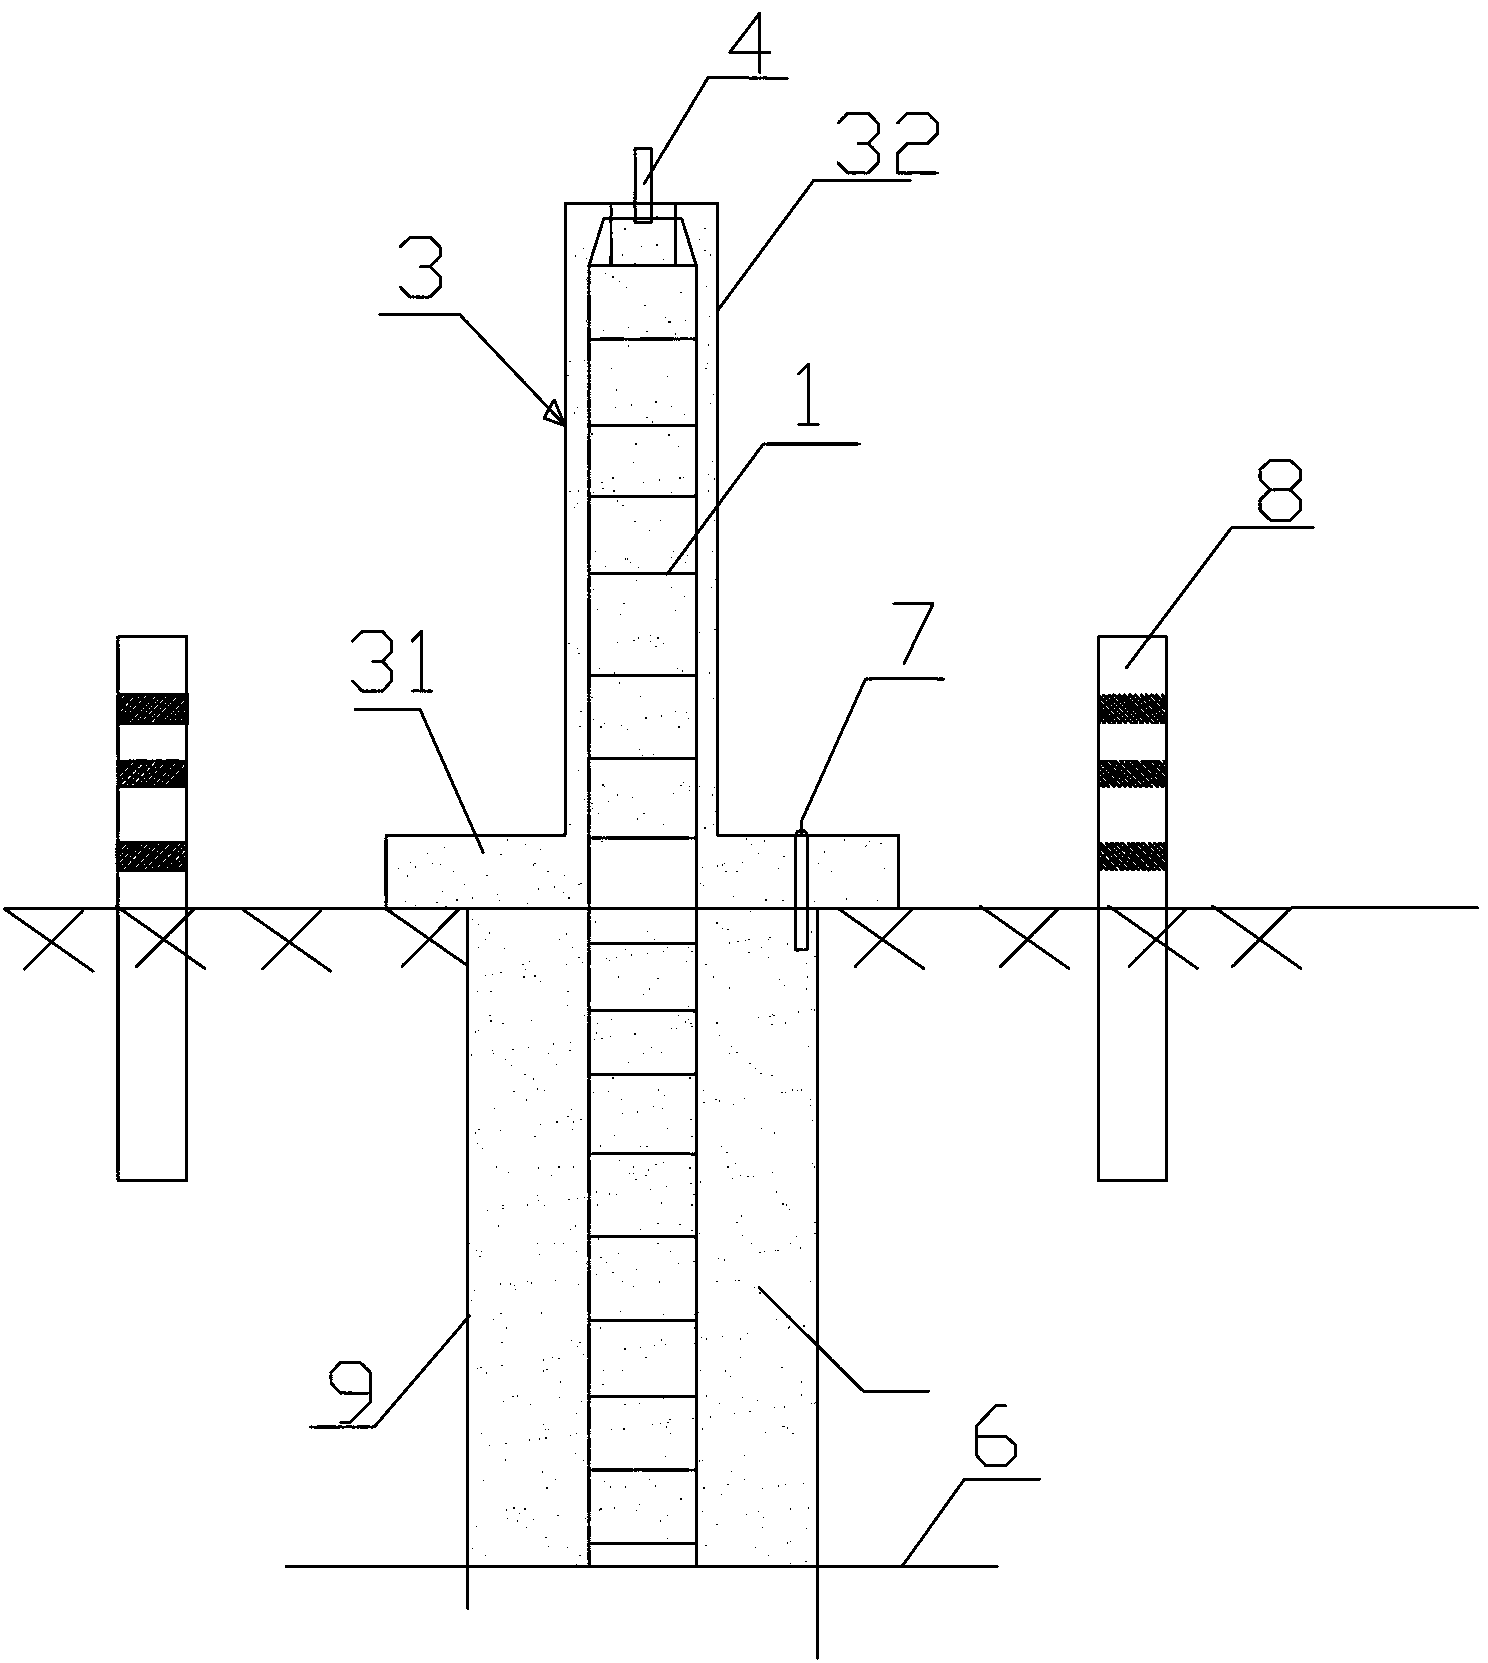 Fabrication method of forced centering observation pillar for precision engineering measurement and observation pillar